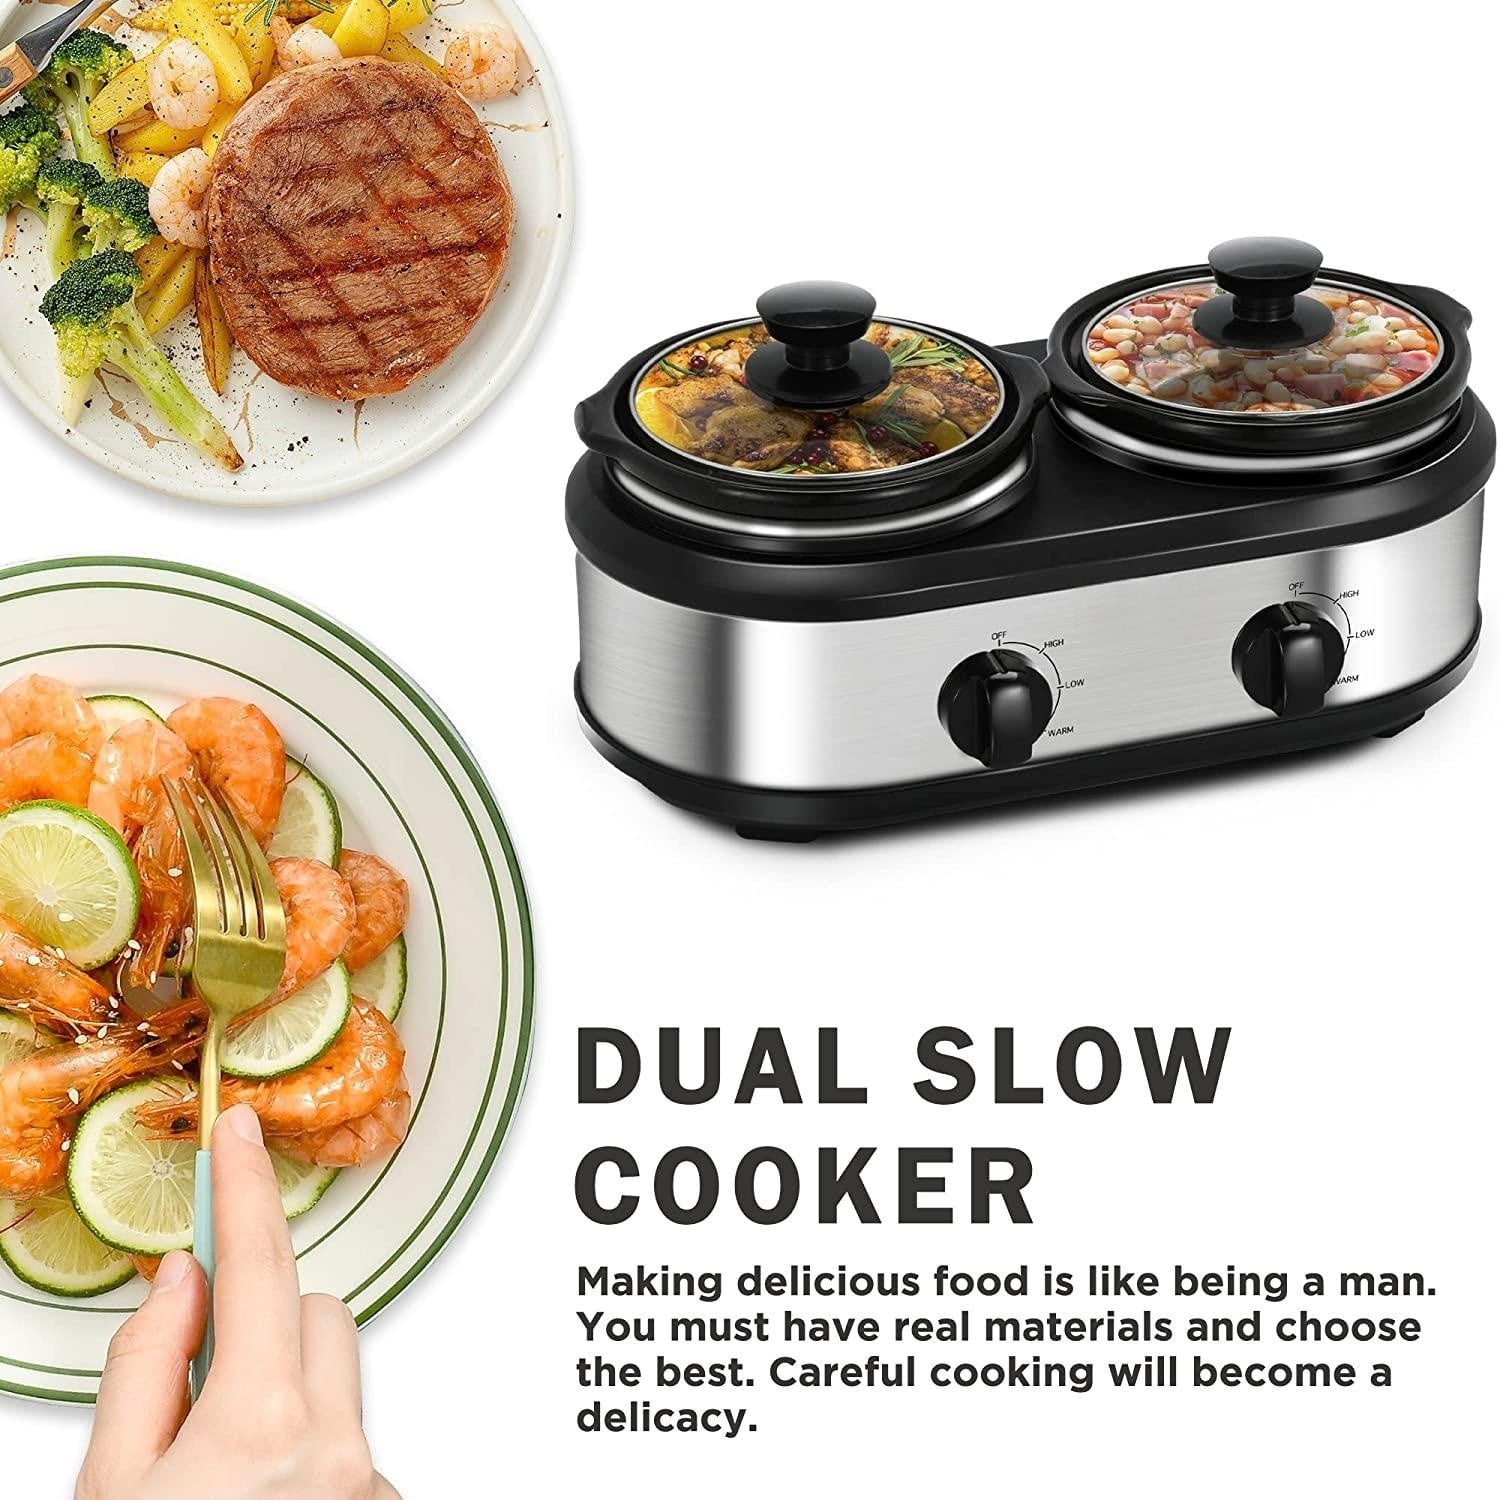 Chefman RJ15-125-D Double Slow Cooker & Buffet Server with 2 Removable 1.25  Qt. Oval Crocks, Pot Inserts Individually Heat Controlled, 2.5 Quarts